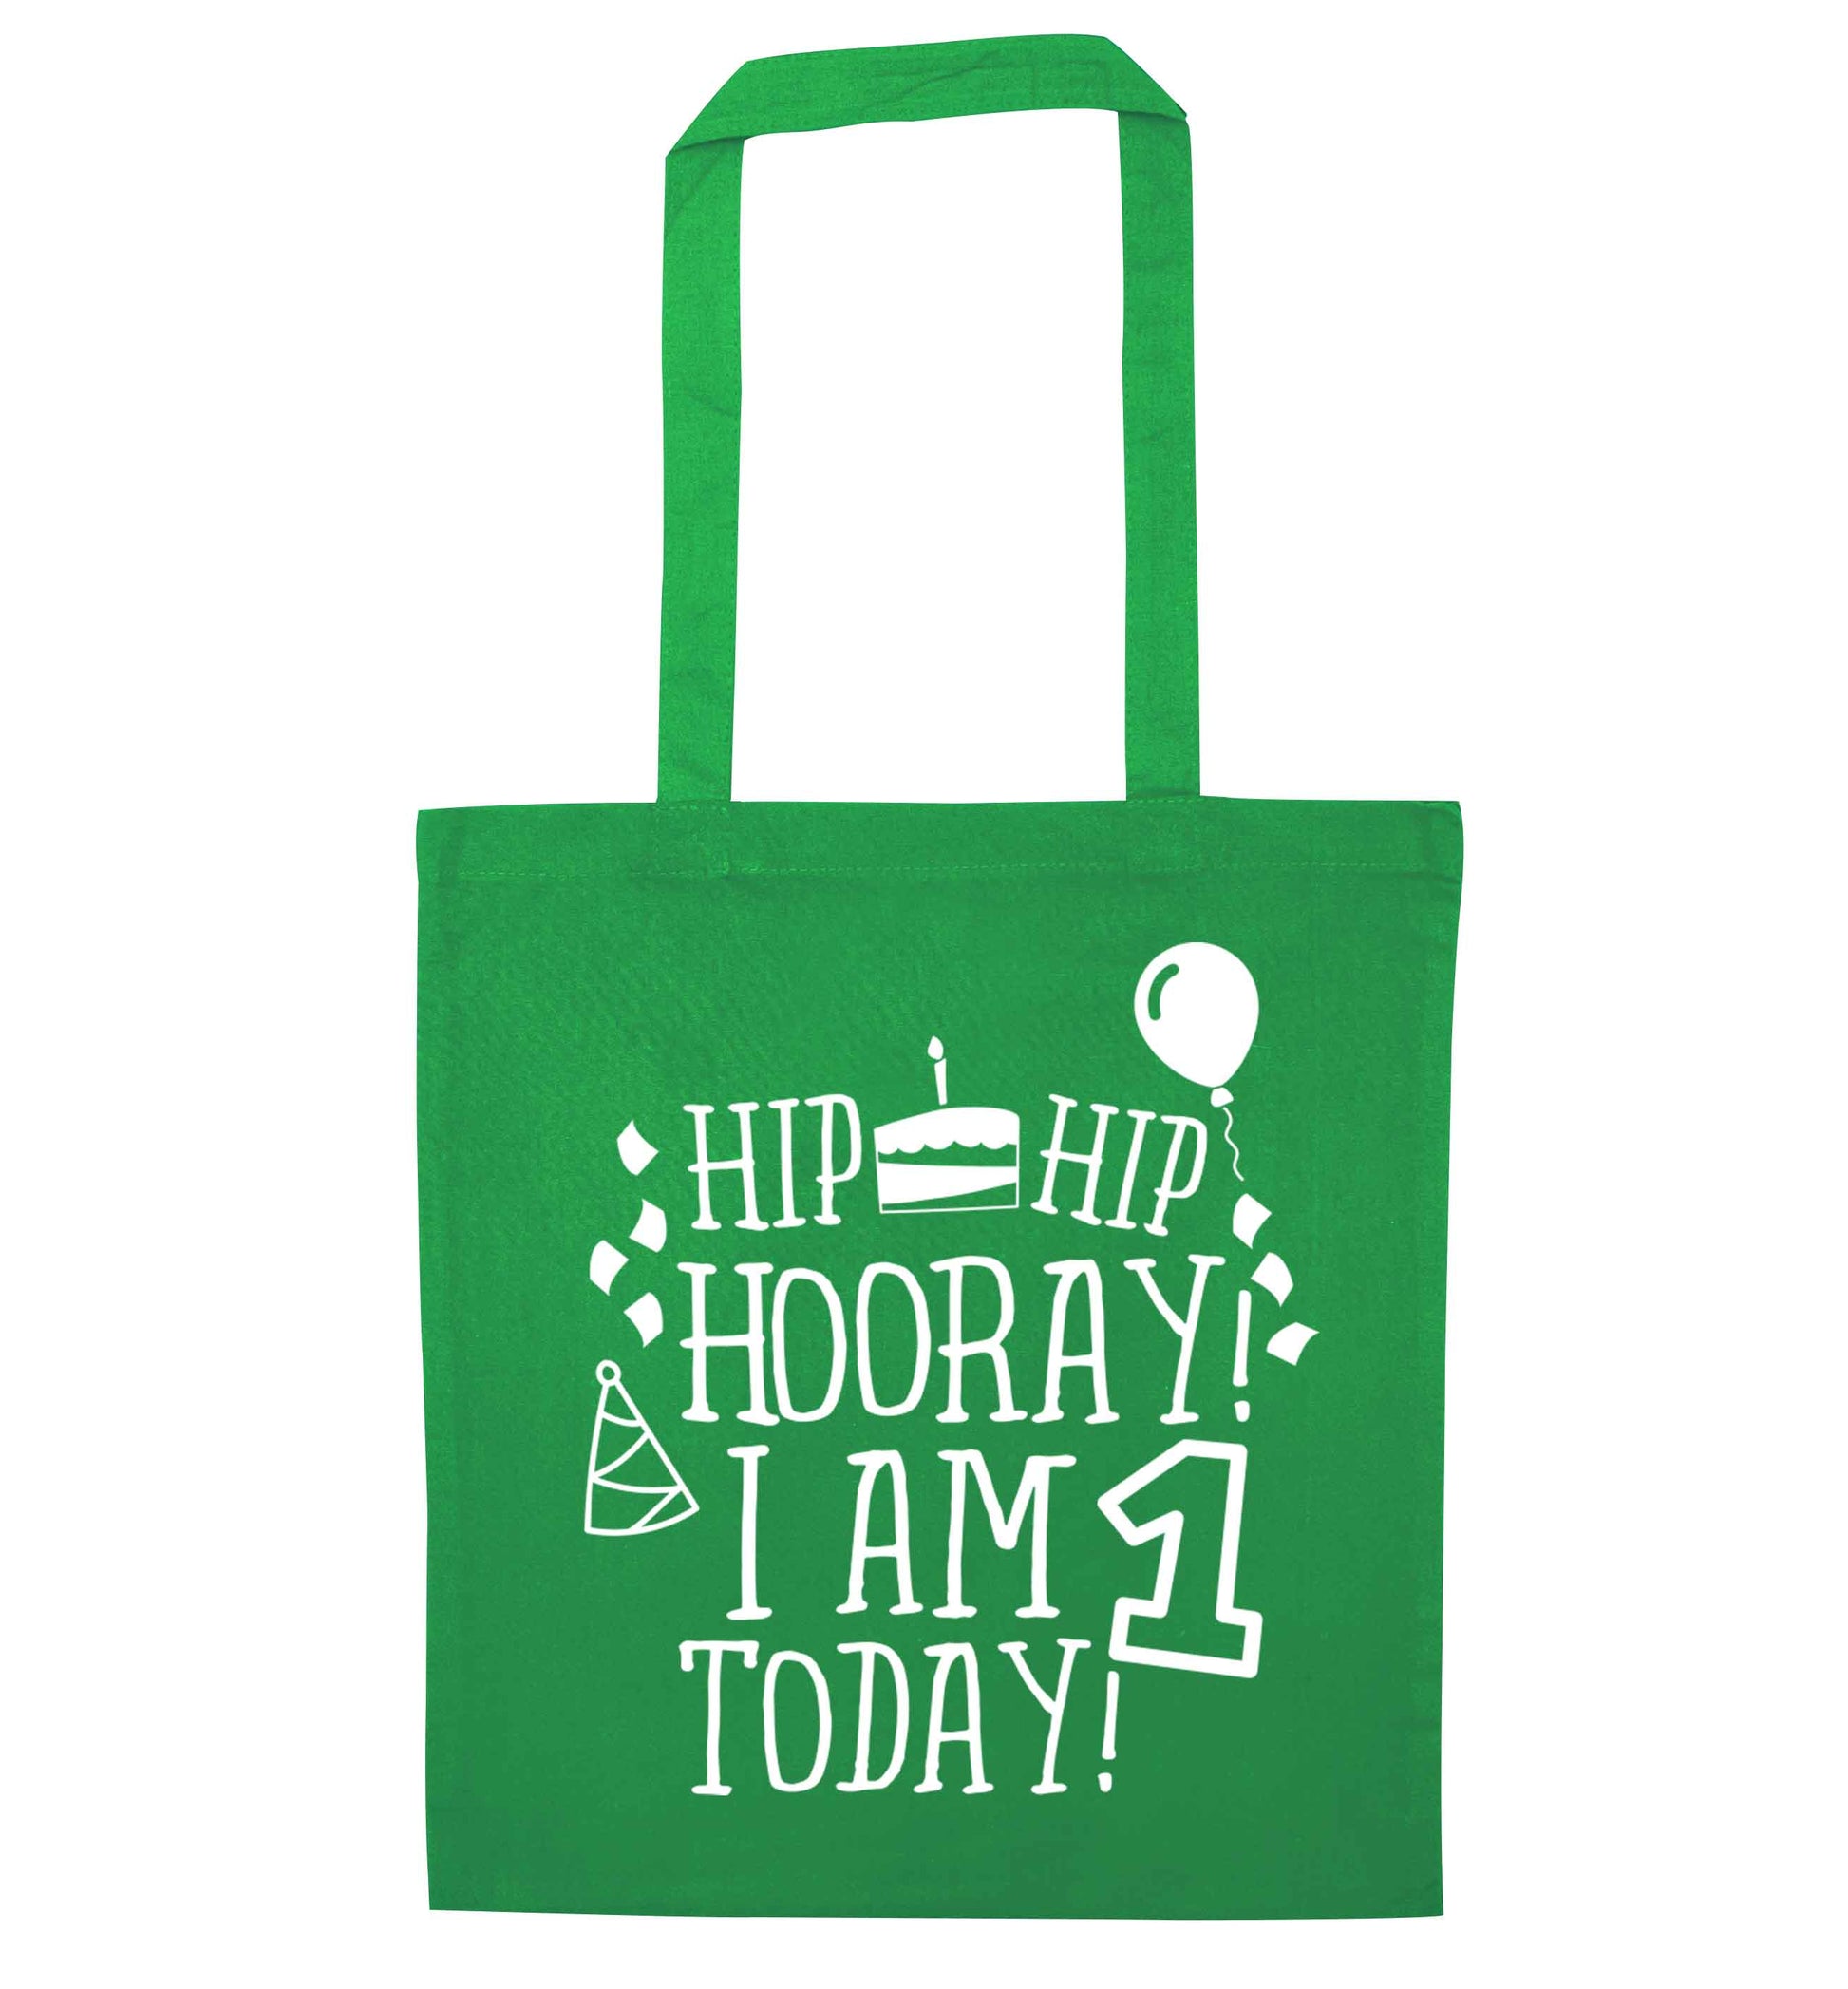 I am One Today green tote bag